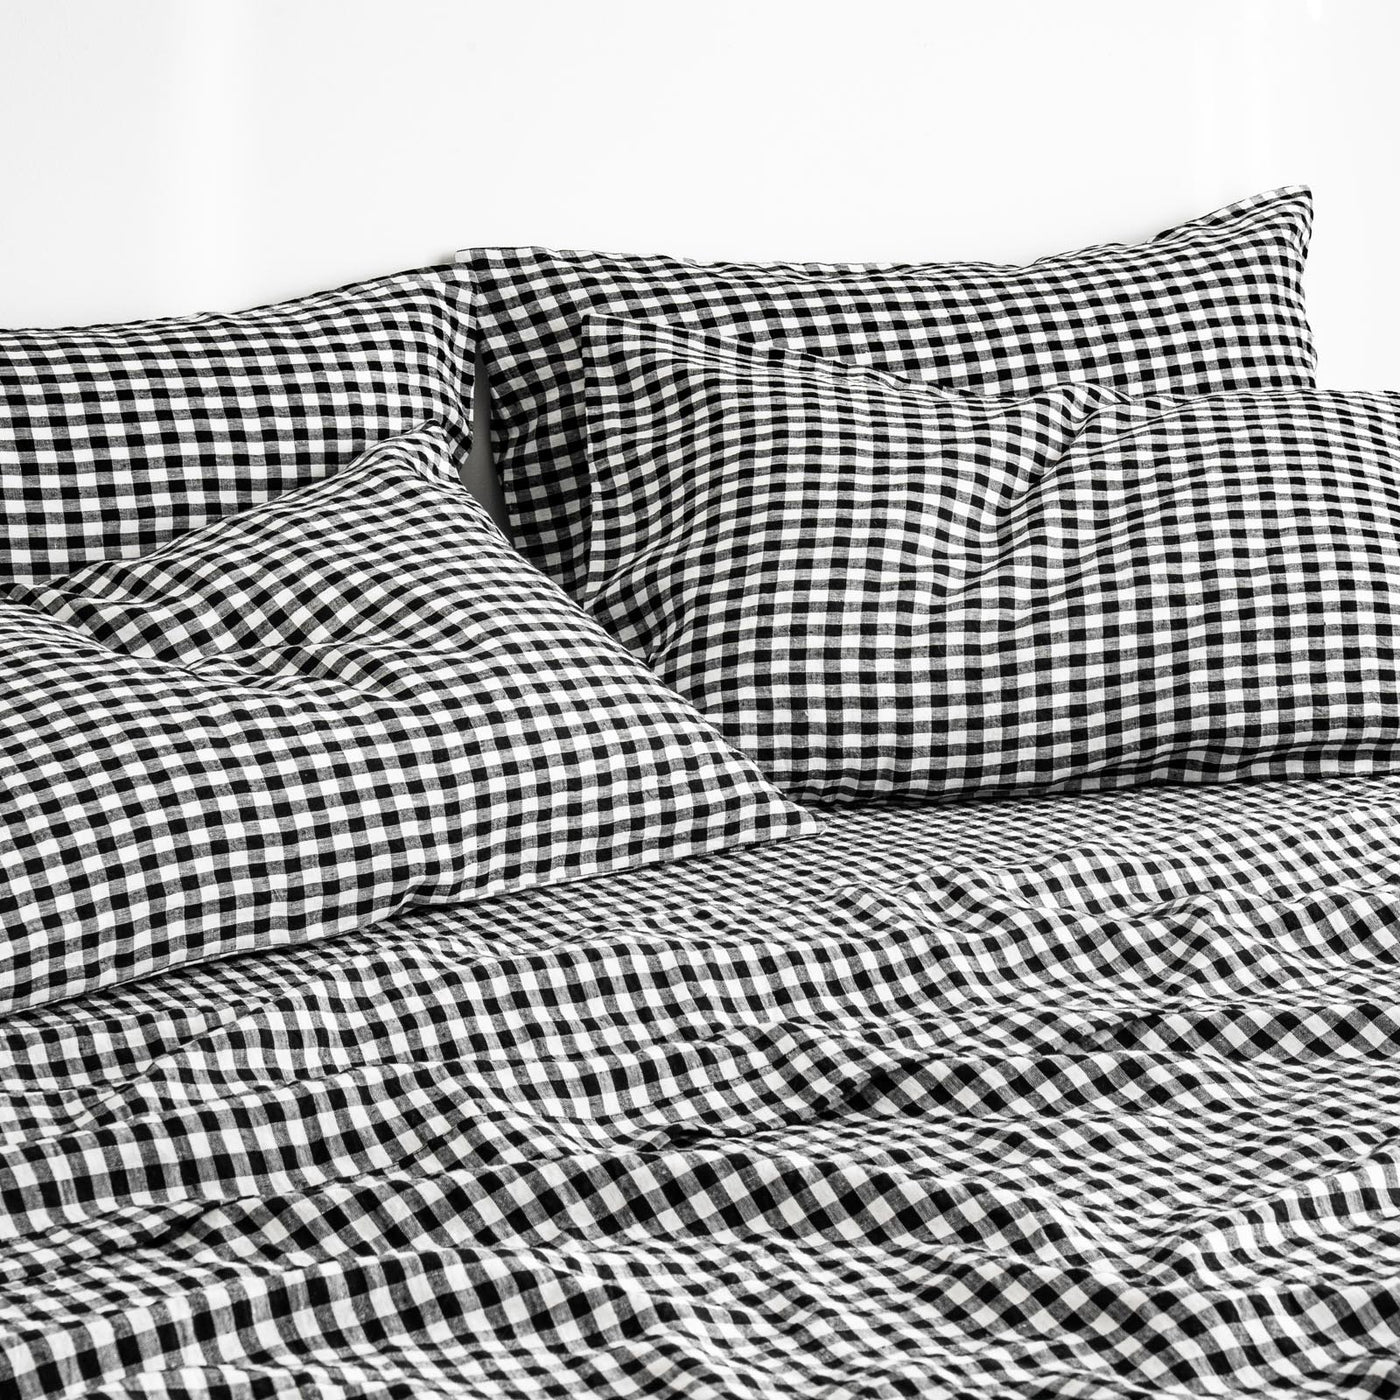 French Flax Linen Sheet Set in Charcoal Gingham